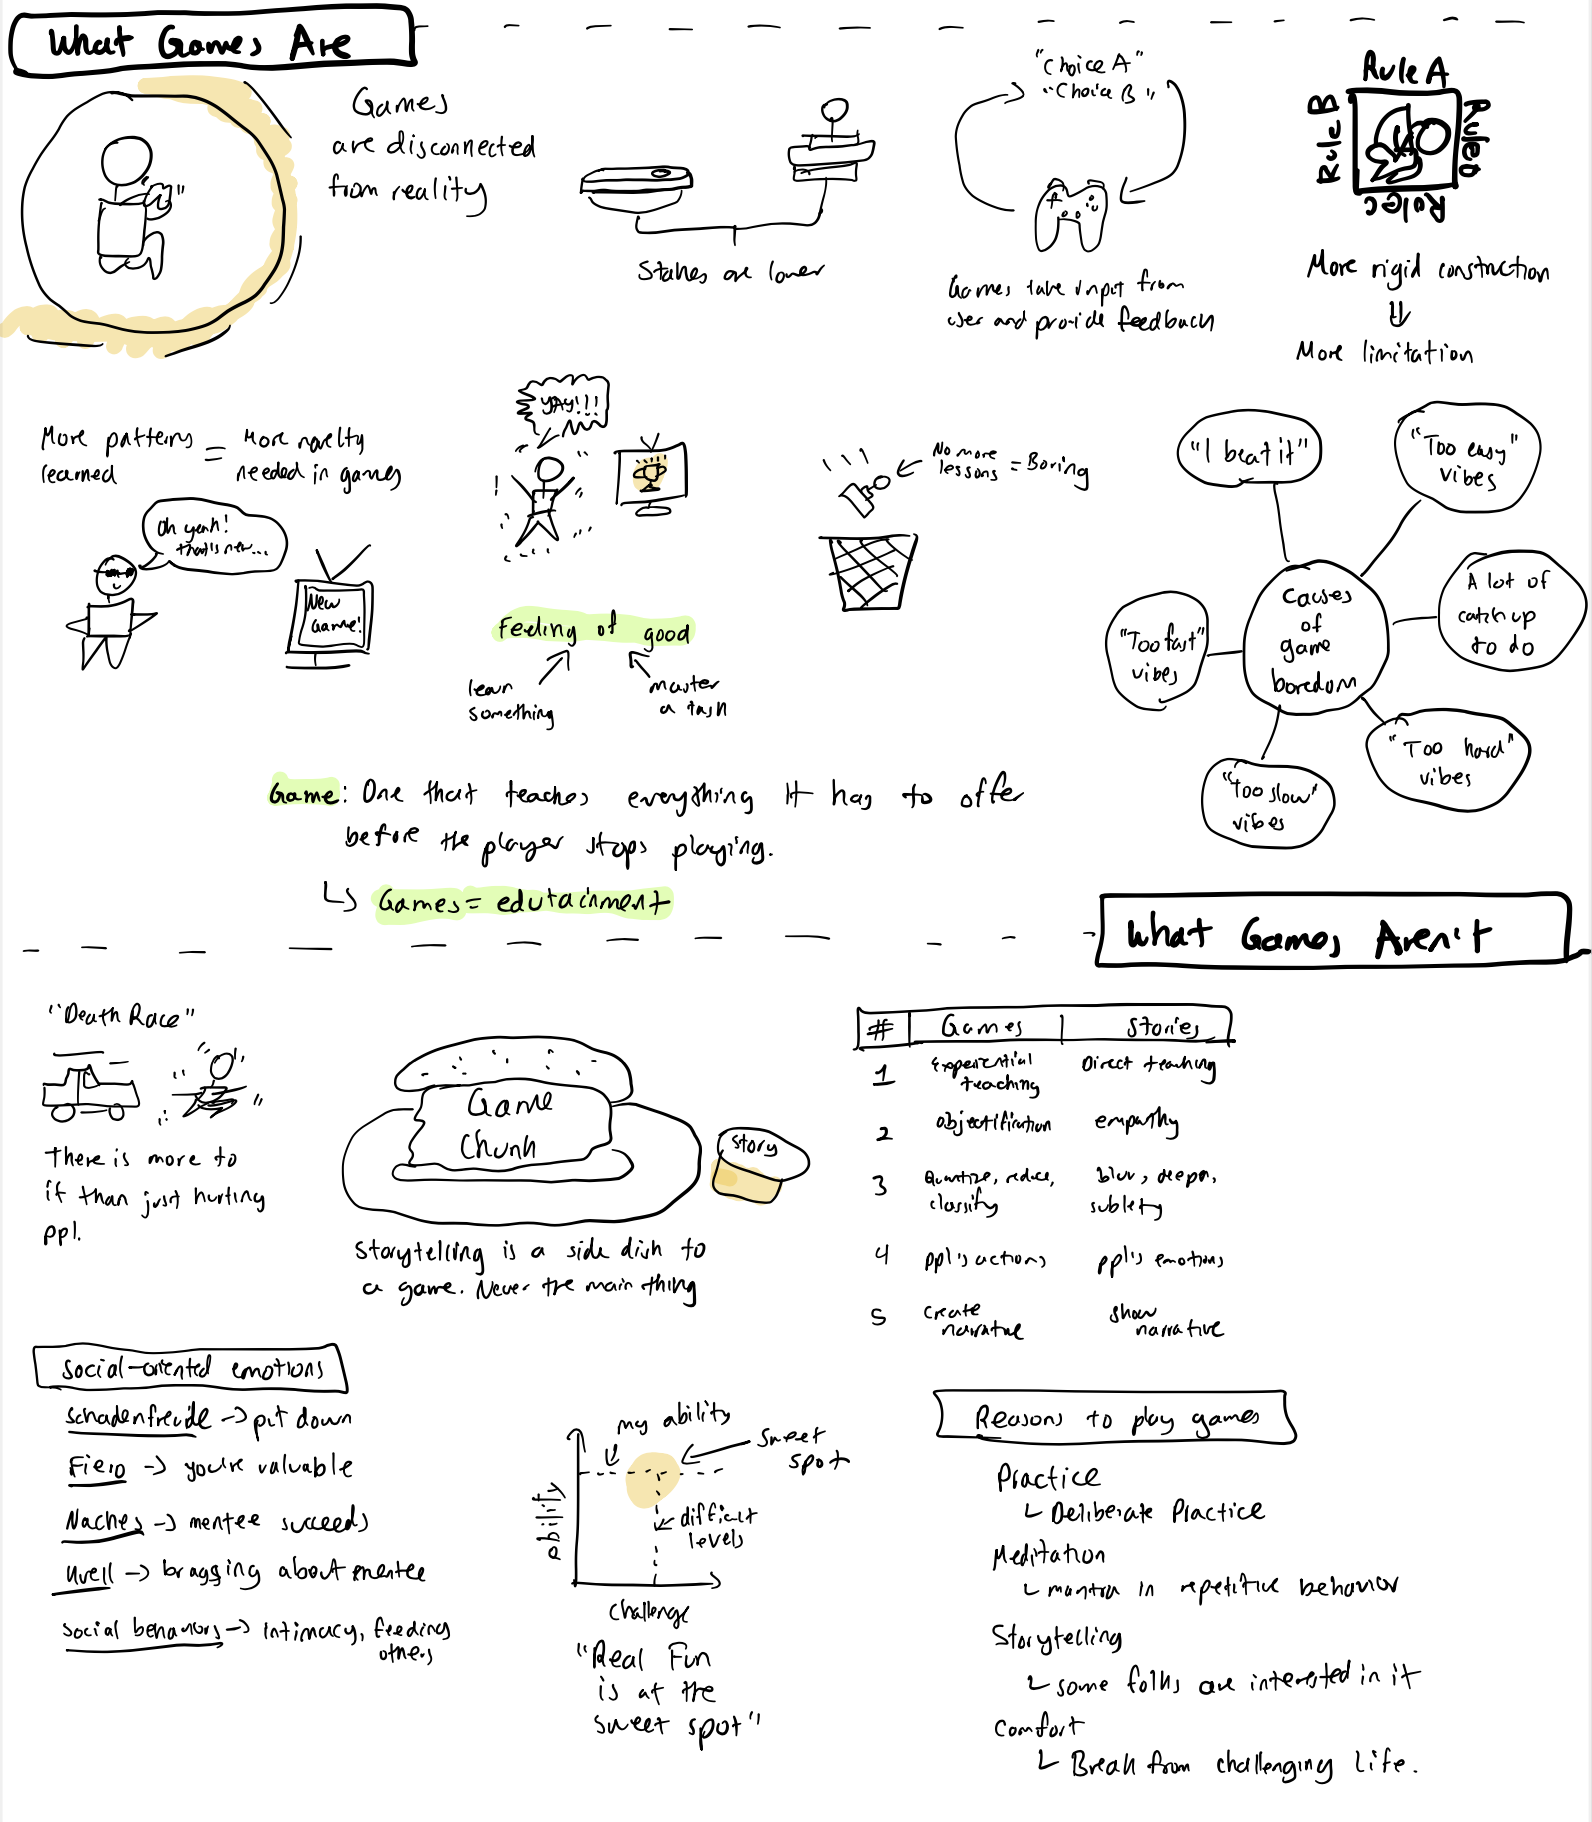 Sketchnote of Chapter PDF titled "What Games Are and Aren't"